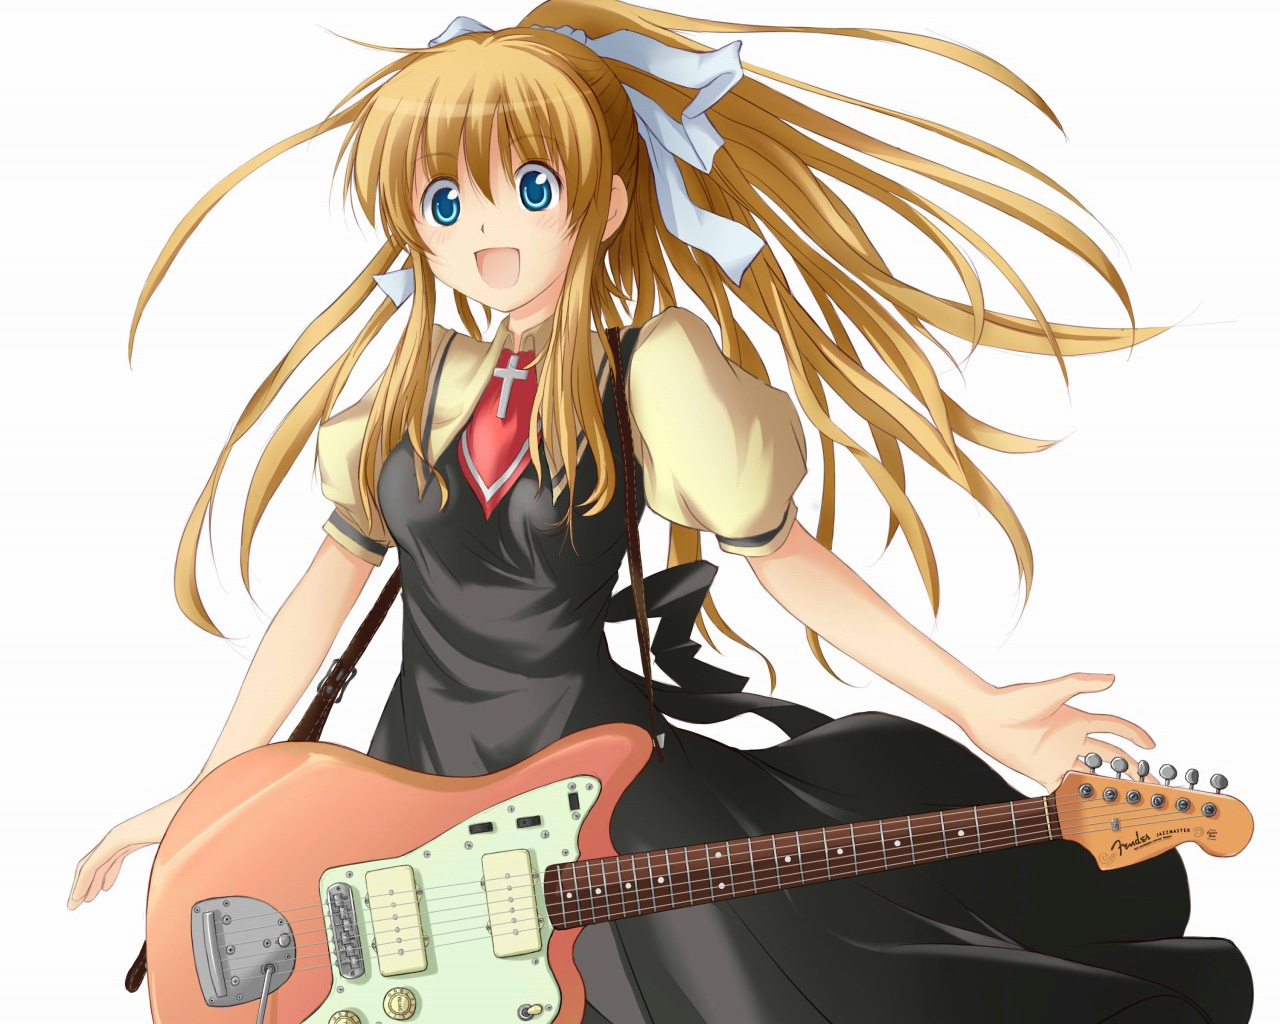 Where To Buy Guitars & Drums Seen in Bocchi the Rock Anime